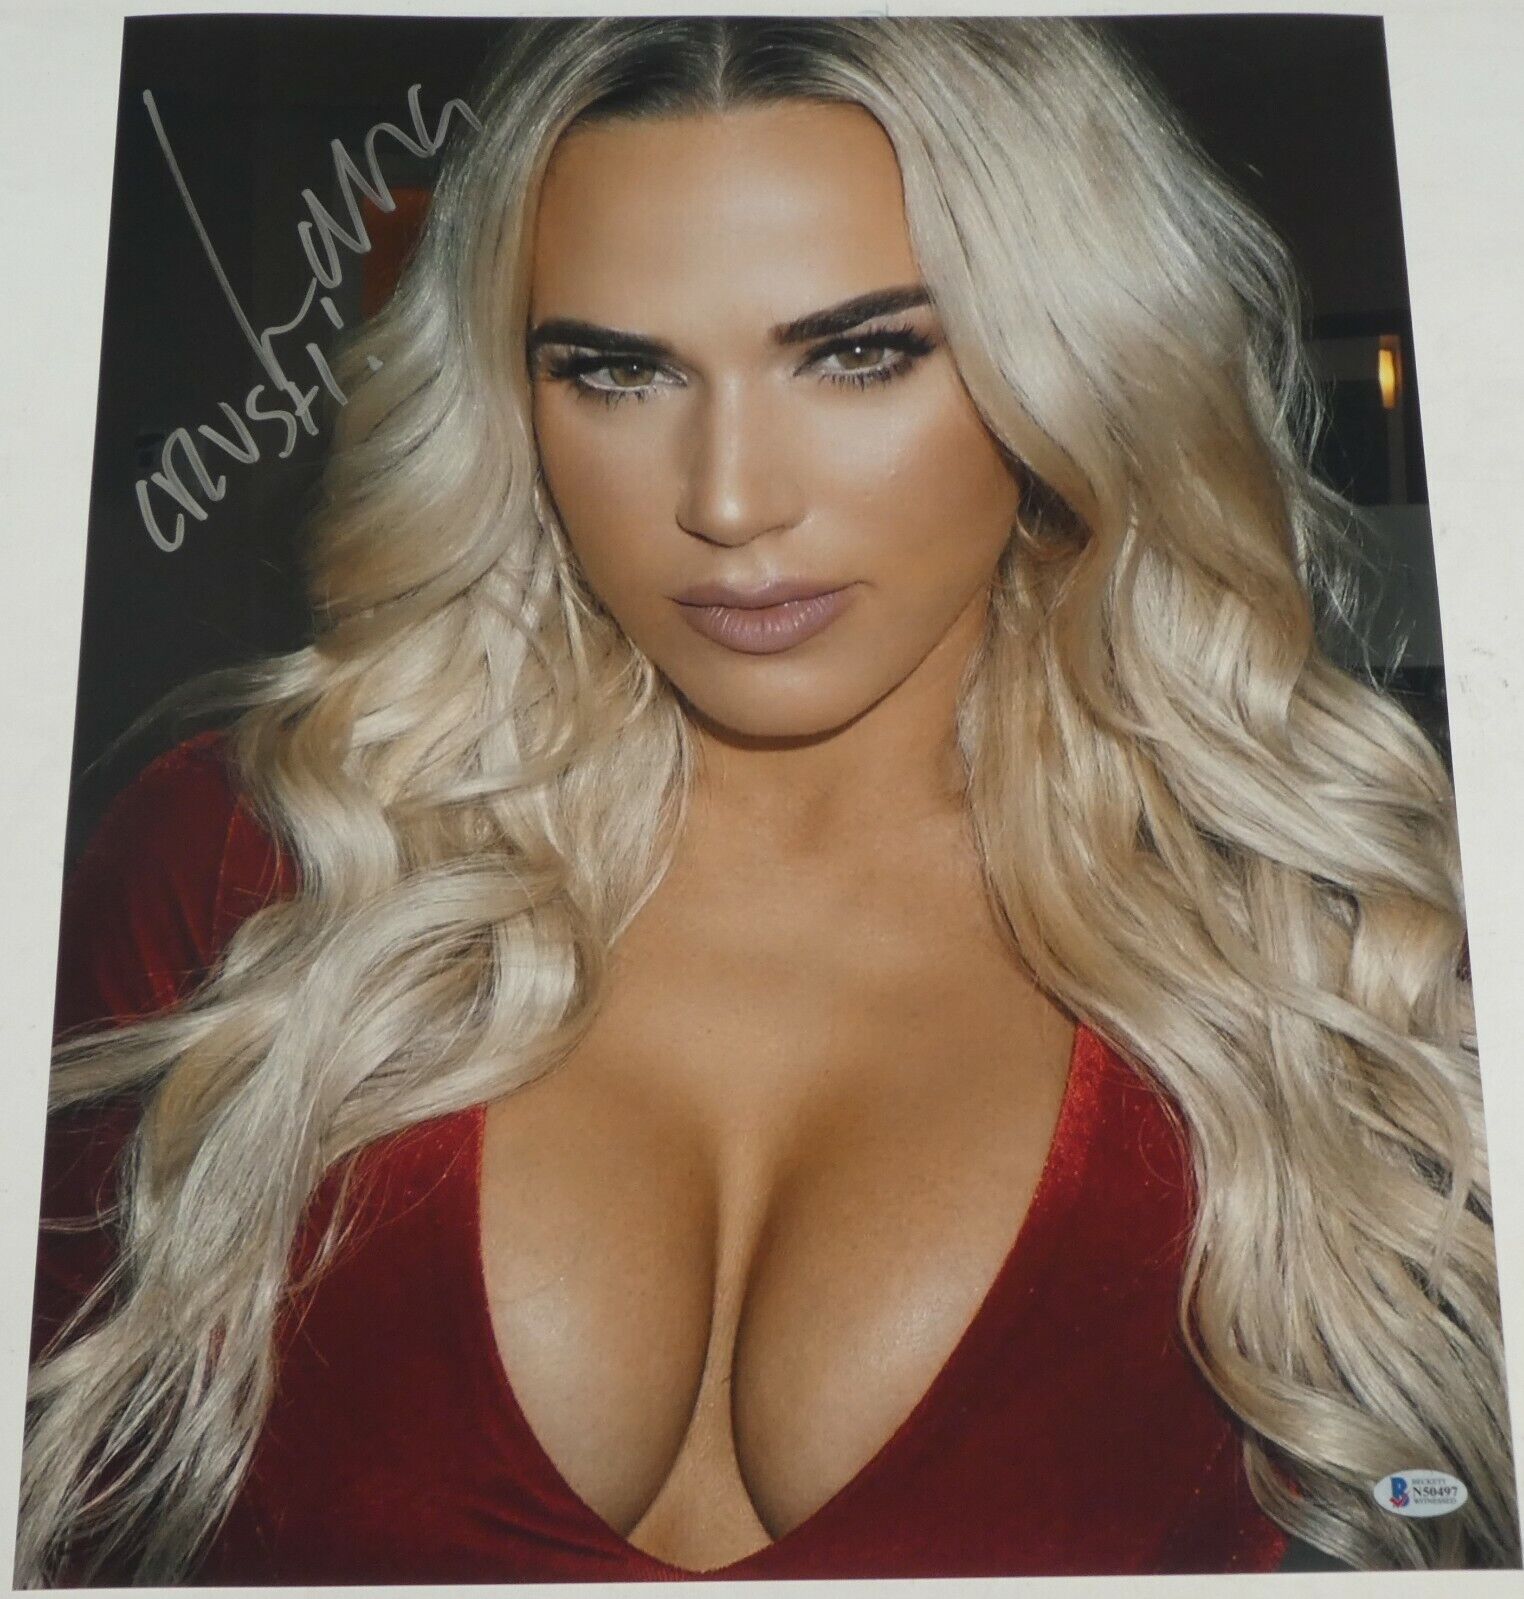 Lana Signed 16x20 Photo Poster painting BAS Beckett COA WWE Total Divas Picture Autograph Day 97